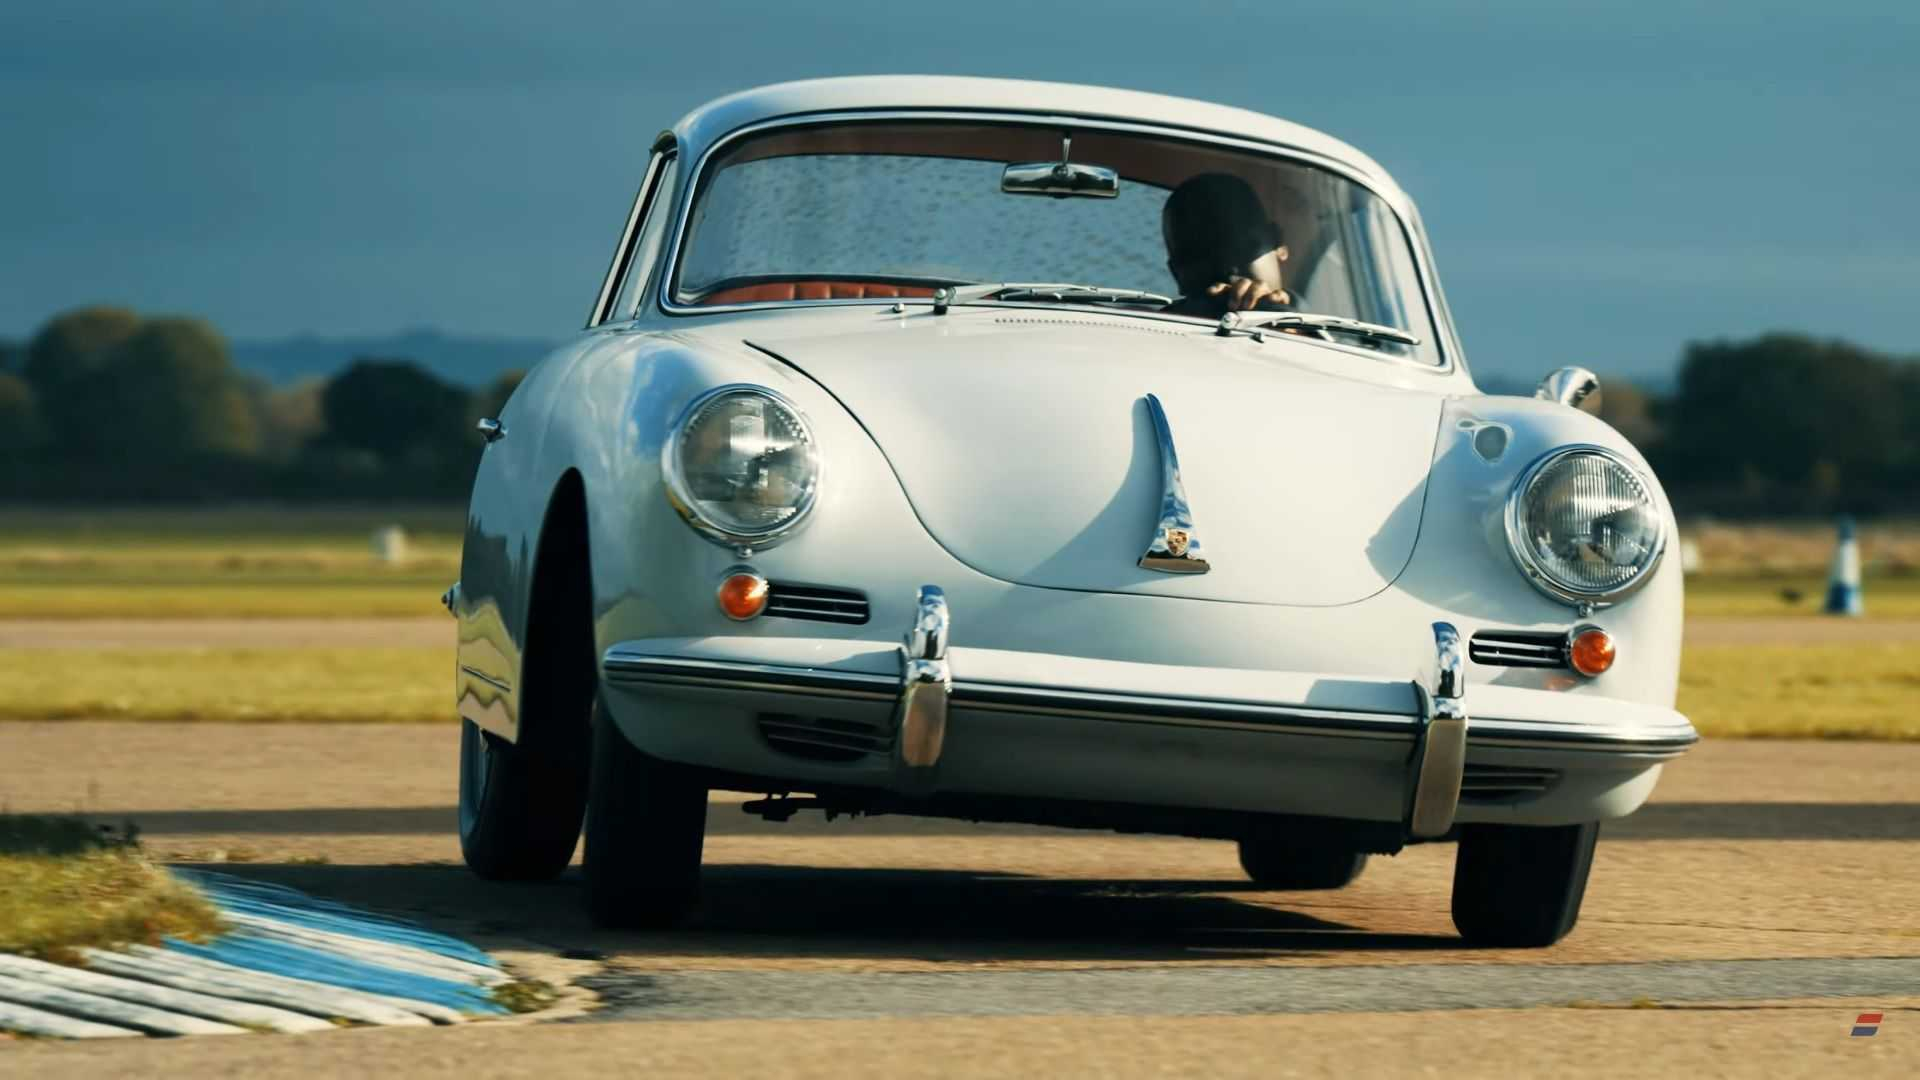 1920x1080 UK: This electrified Porsche 356 has a good ol' manual gearbox